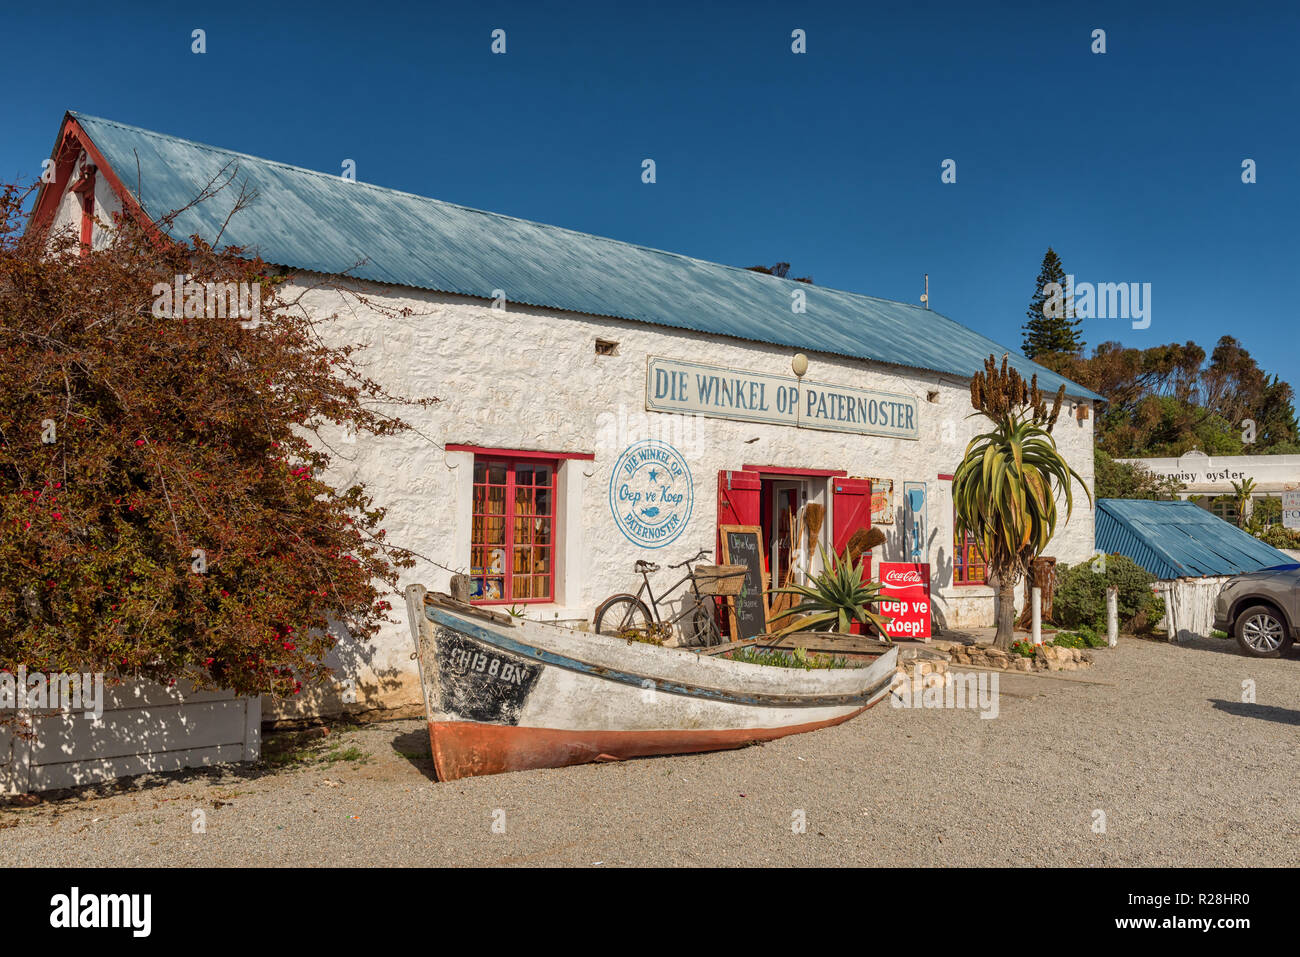 PATERNOSTER, SOUTH AFRICA, AUGUST 21, 2018: Die Winkel Op Paternoster, a shop in an historic building in Paternoster on the Atlantic Ocean Coast. A bo Stock Photo